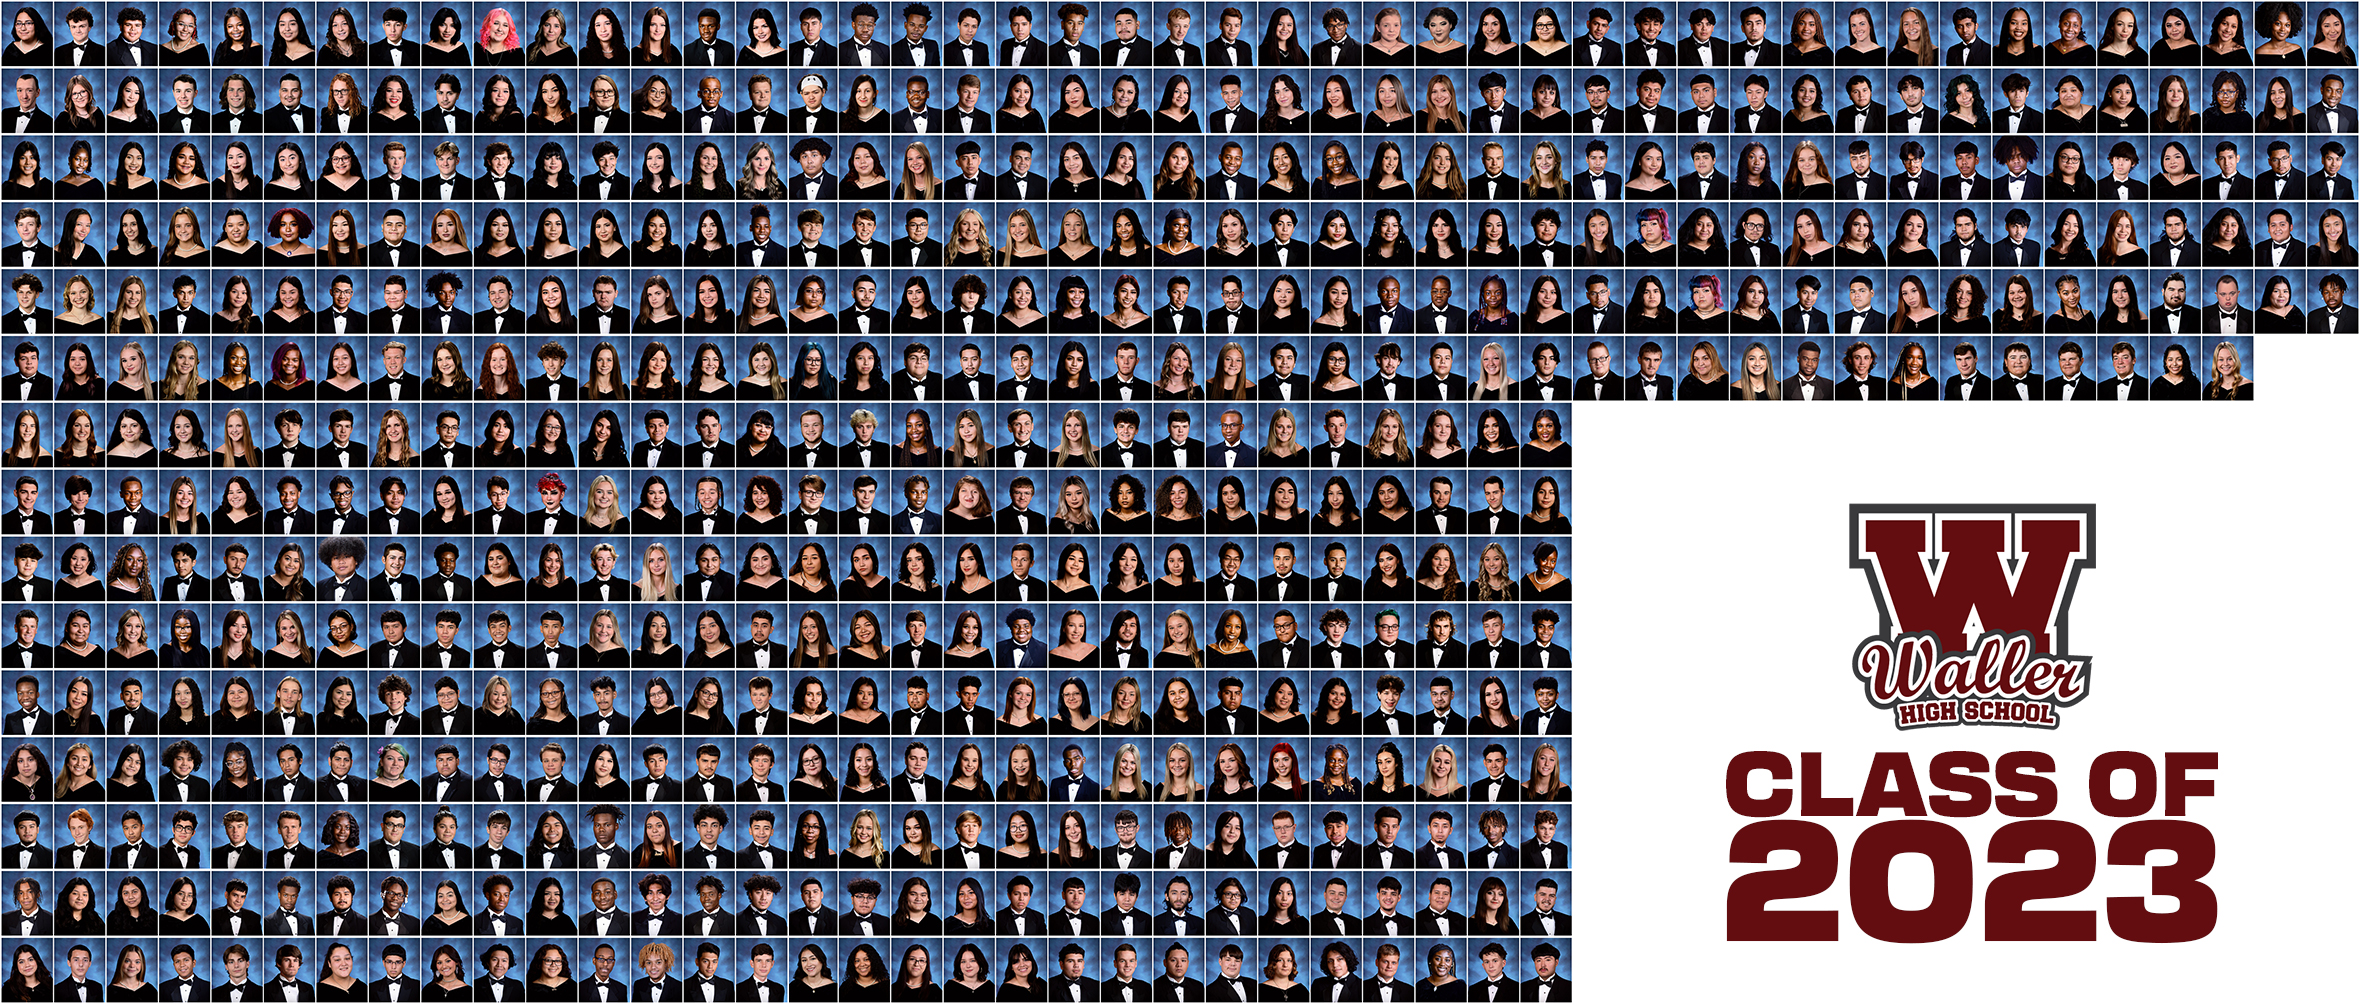 The Waller High School Class of 2023. In recent years, Waller ISD has combined the portraits of its graduates. (courtesy Waller ISD)